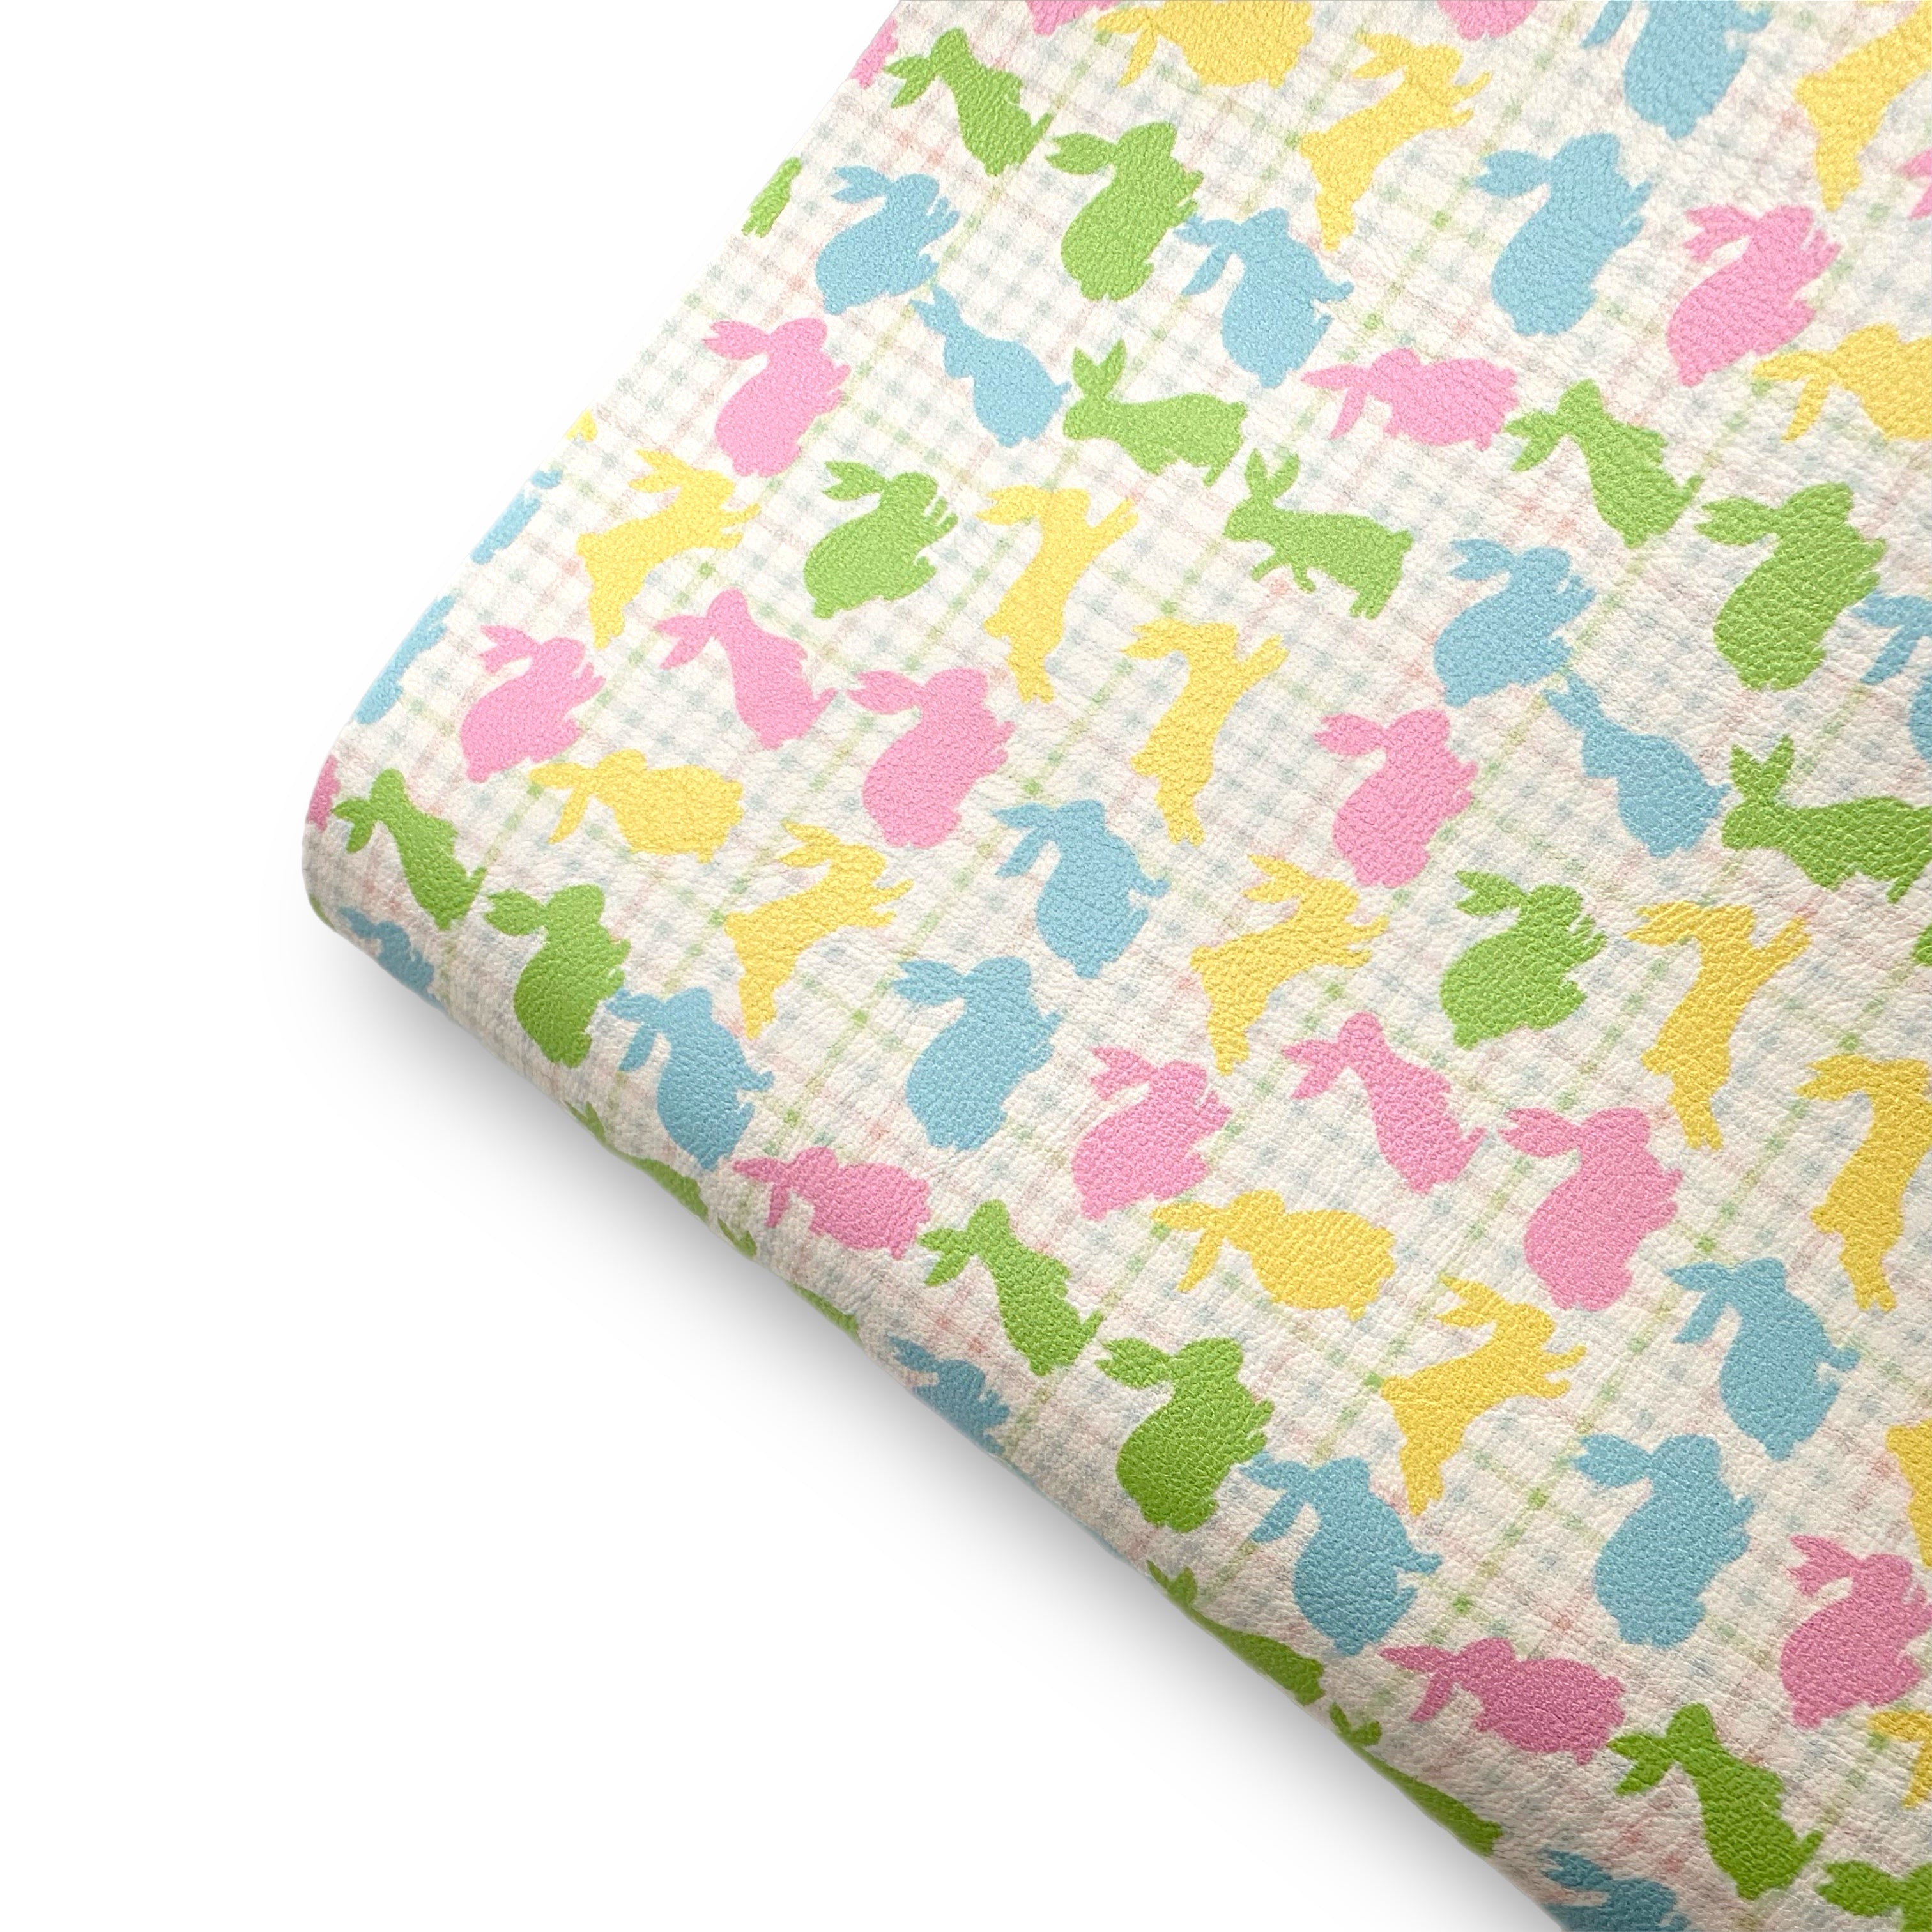 Pastel Gingham Bunny Premium Faux Leather Fabric